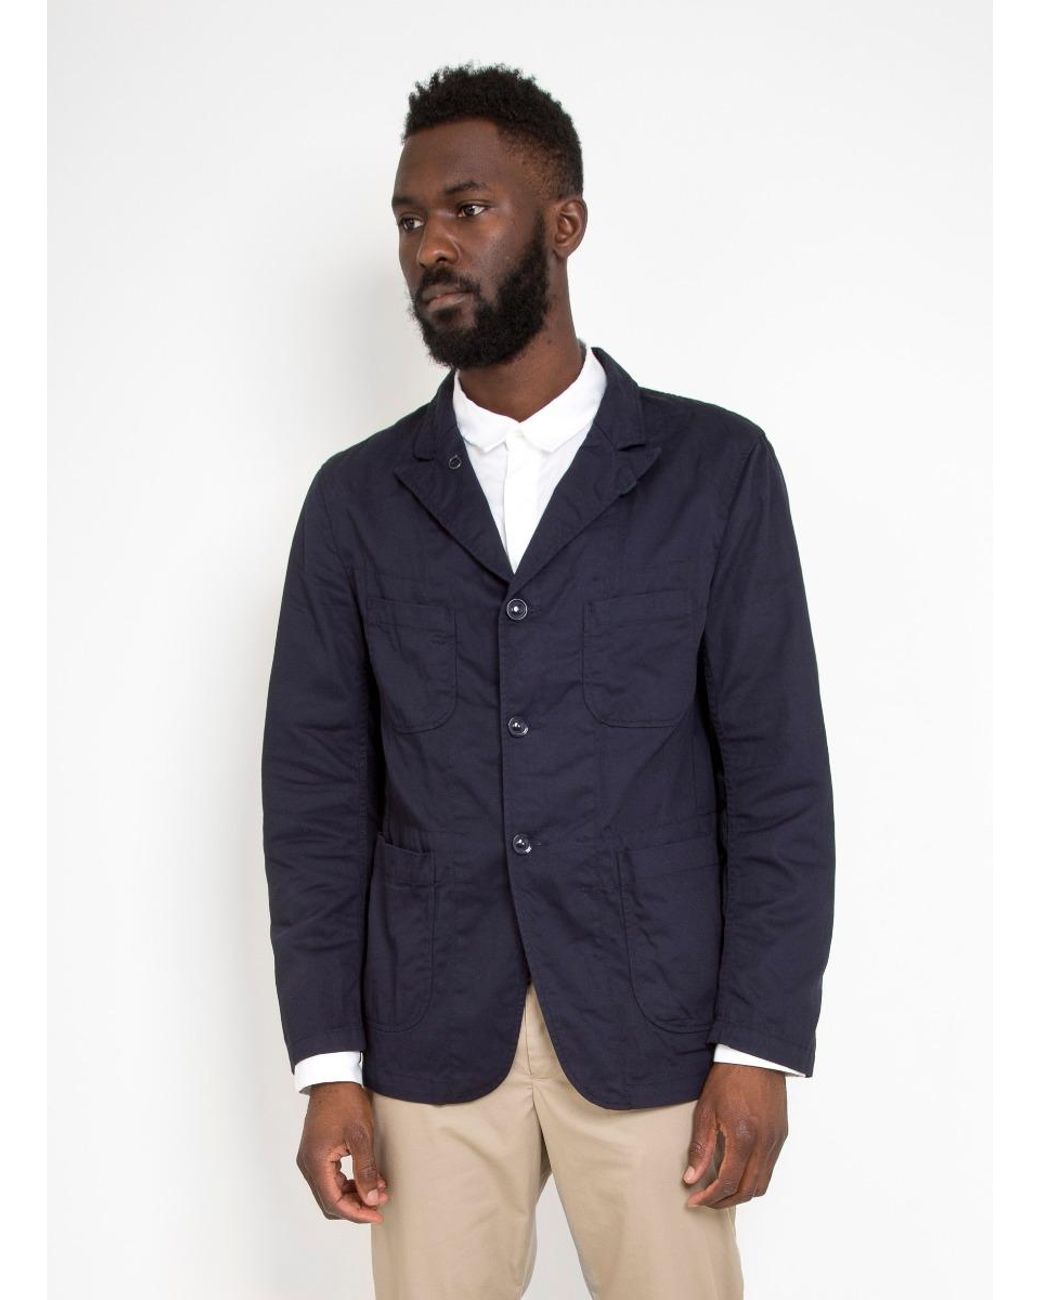 Engineered Garments Bedford Jacket 7oz Cotton Twill in Blue for